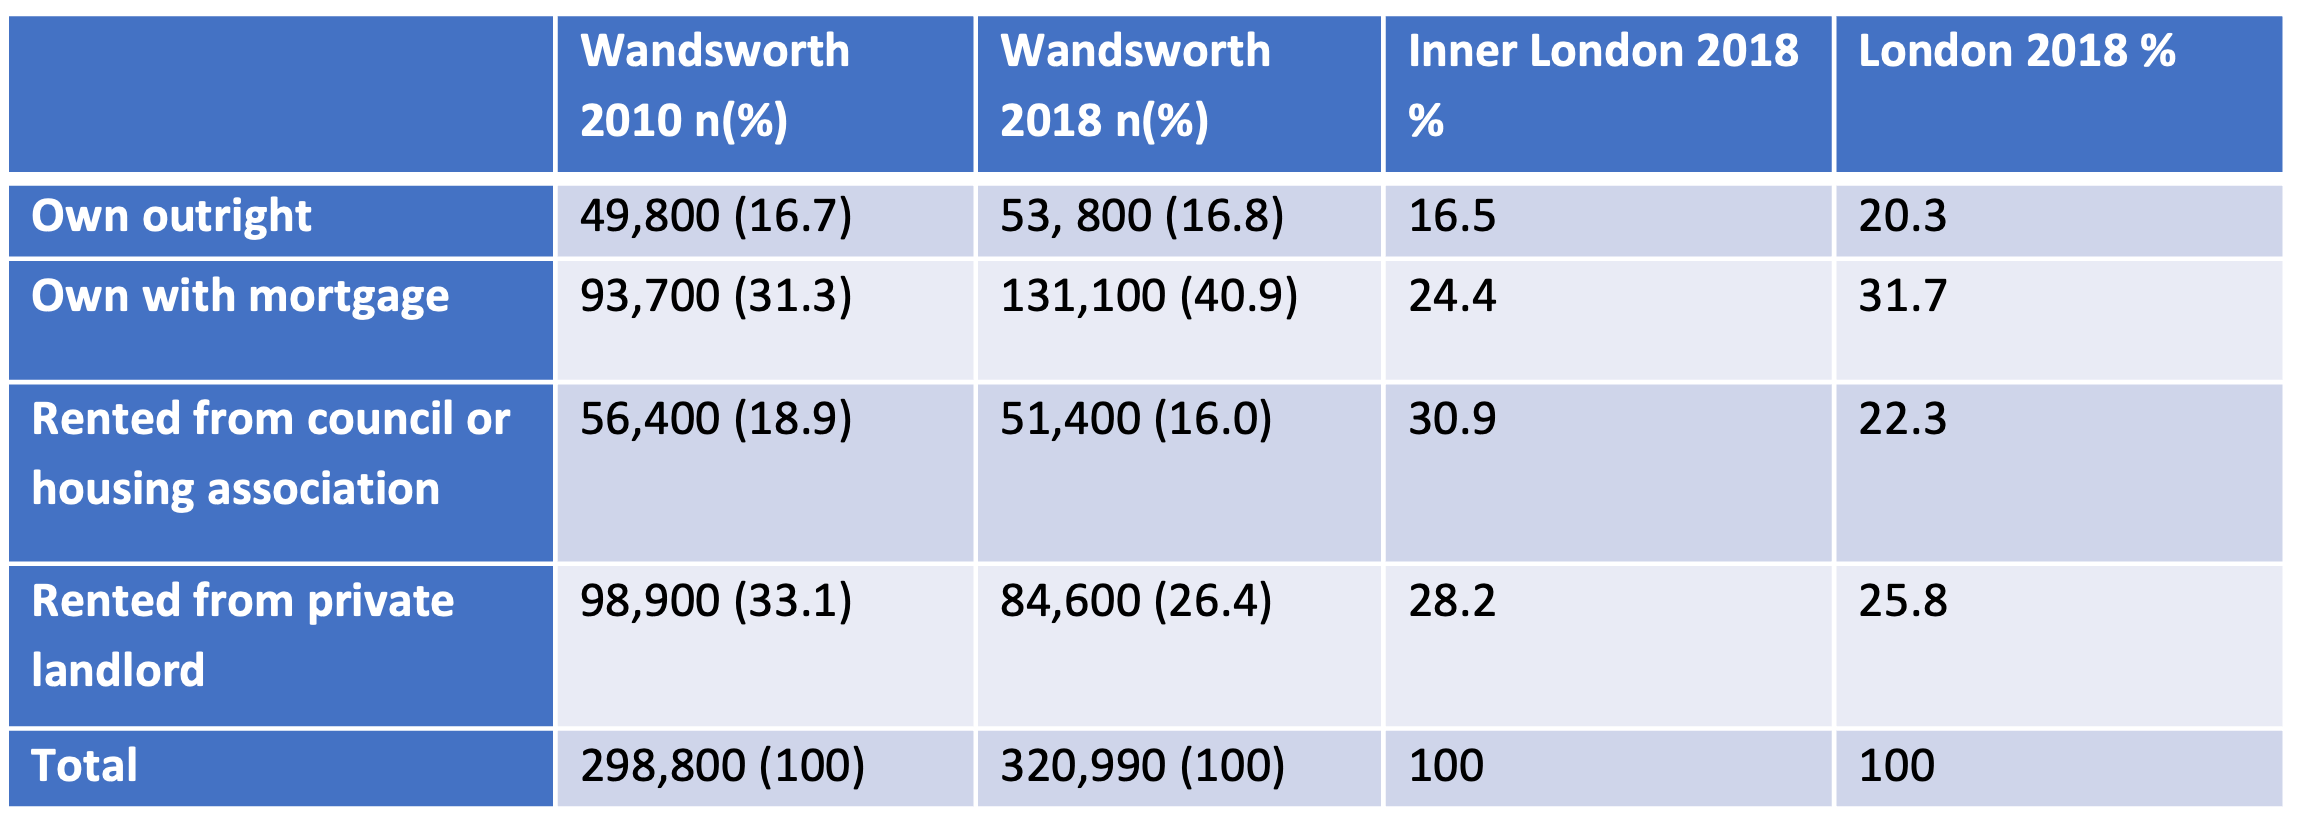 Tenure type of Wandsworth, Inner London and London residents in 2010 and 2018